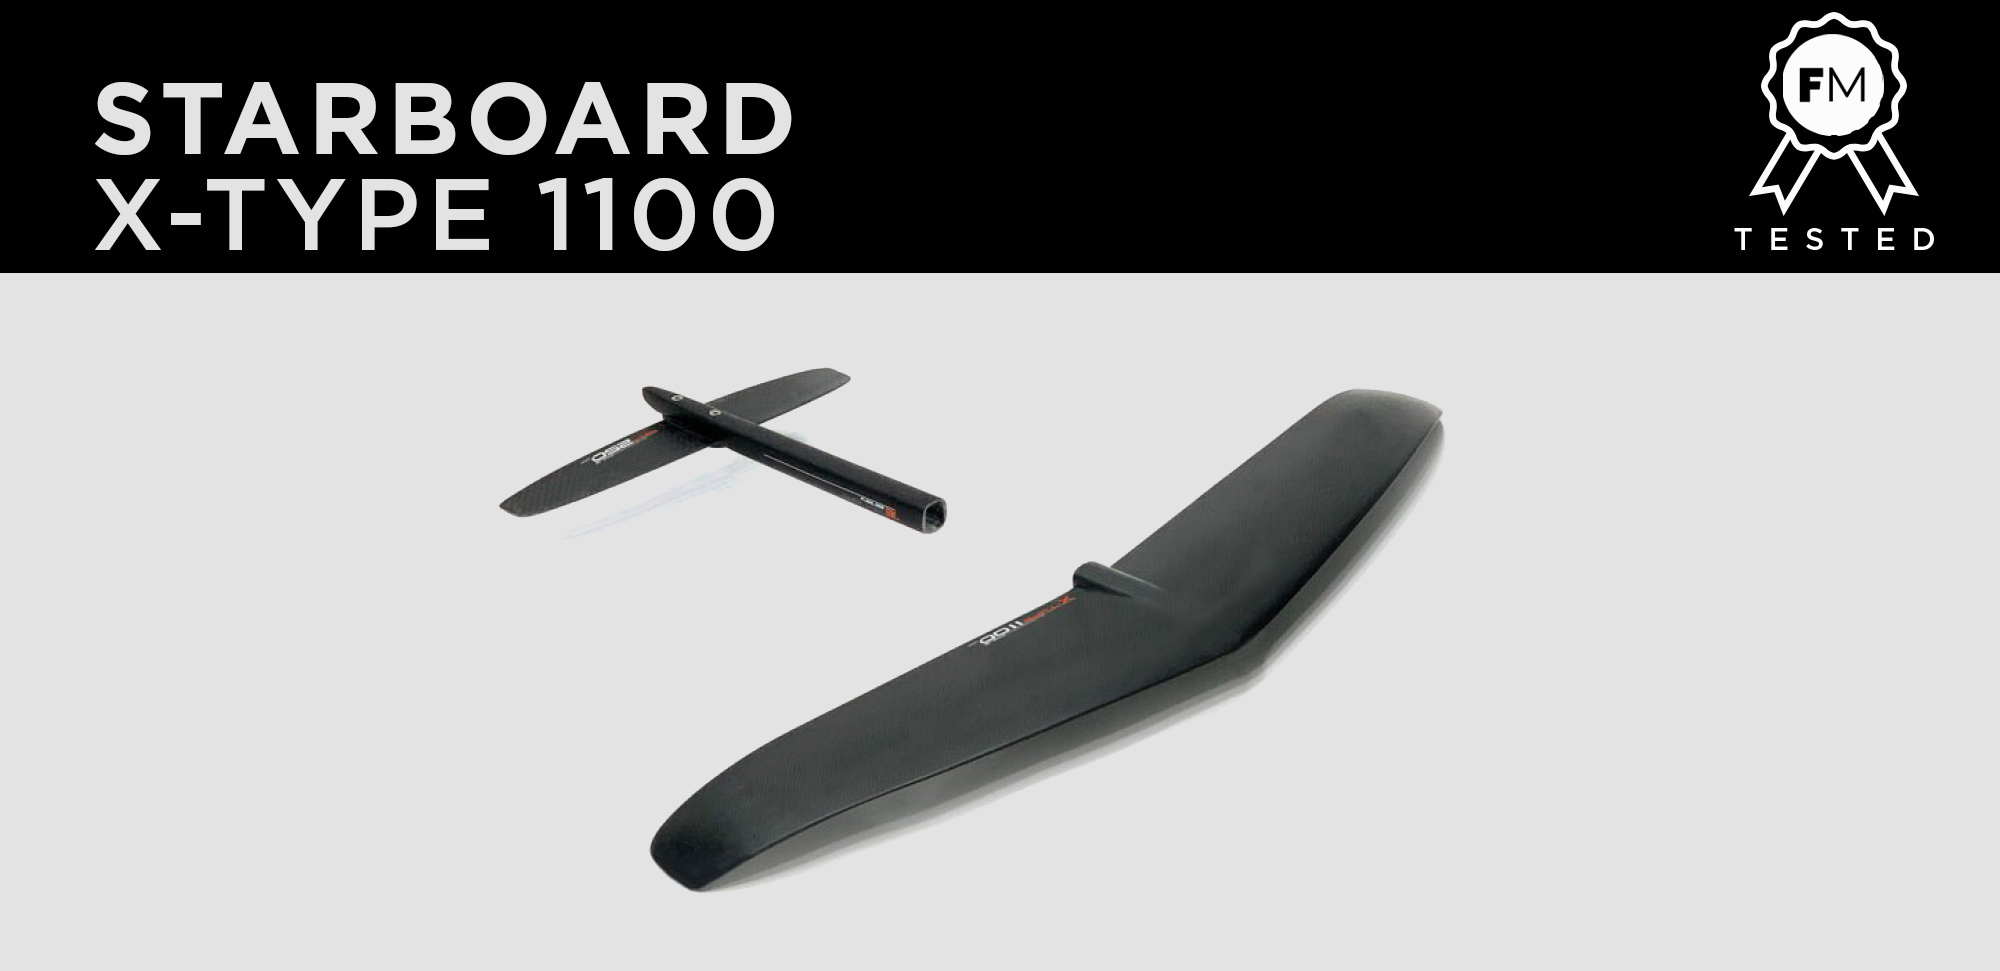 Starboard X-Type 1100 Review - Foiling Magazine Tests